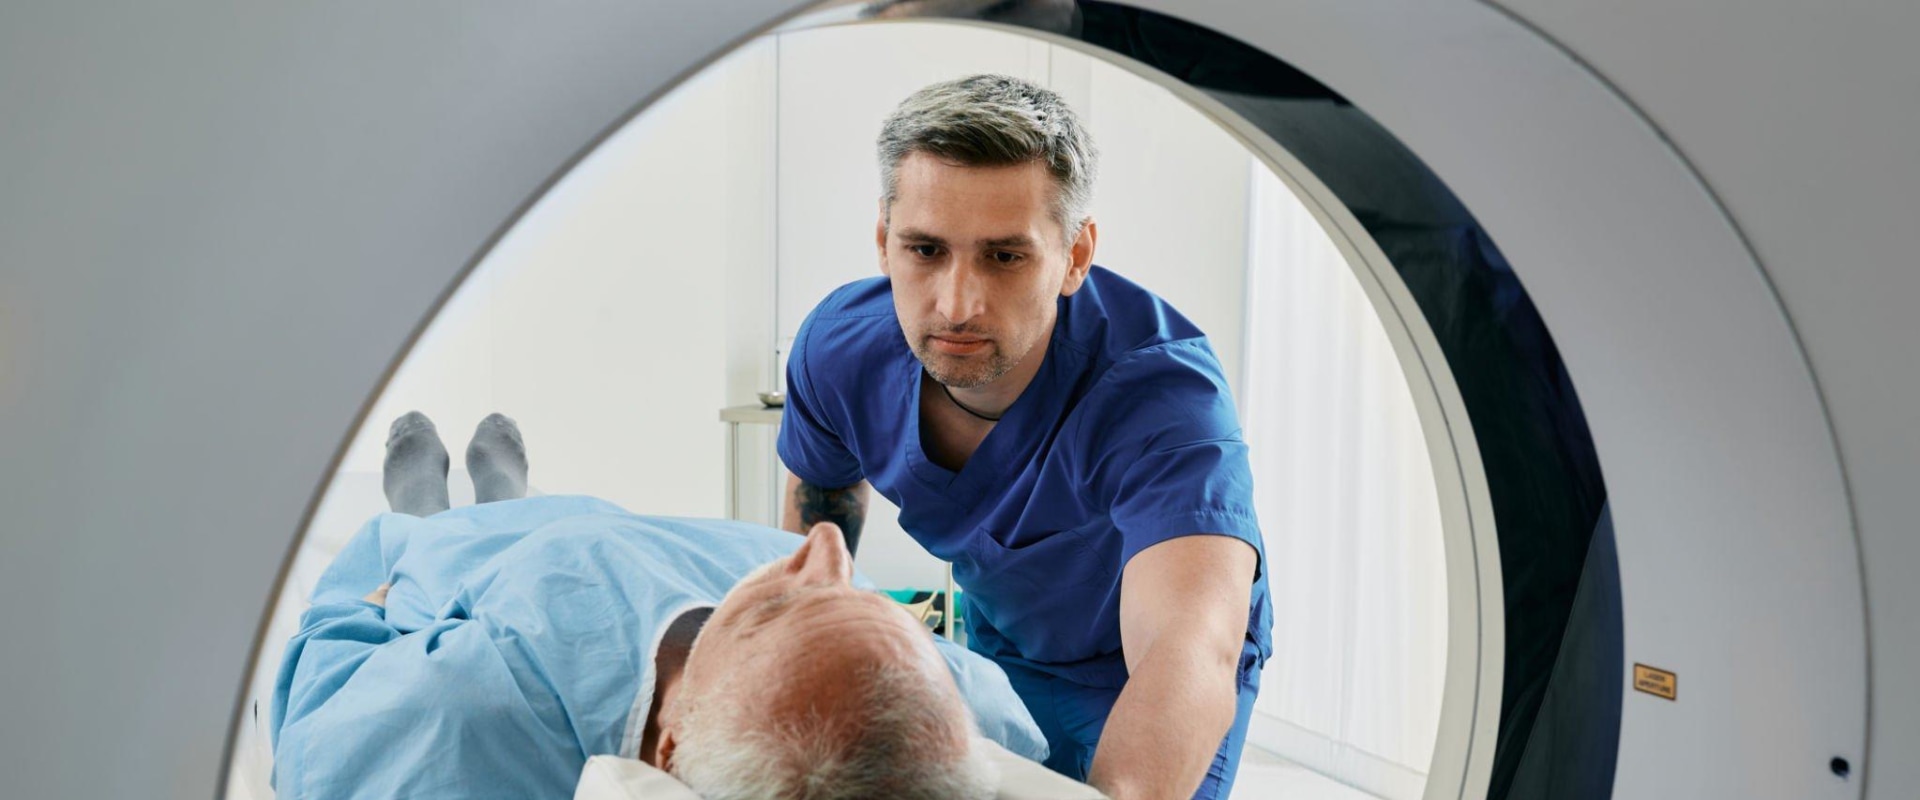 The Impact of MRI on Personal Injury Settlements